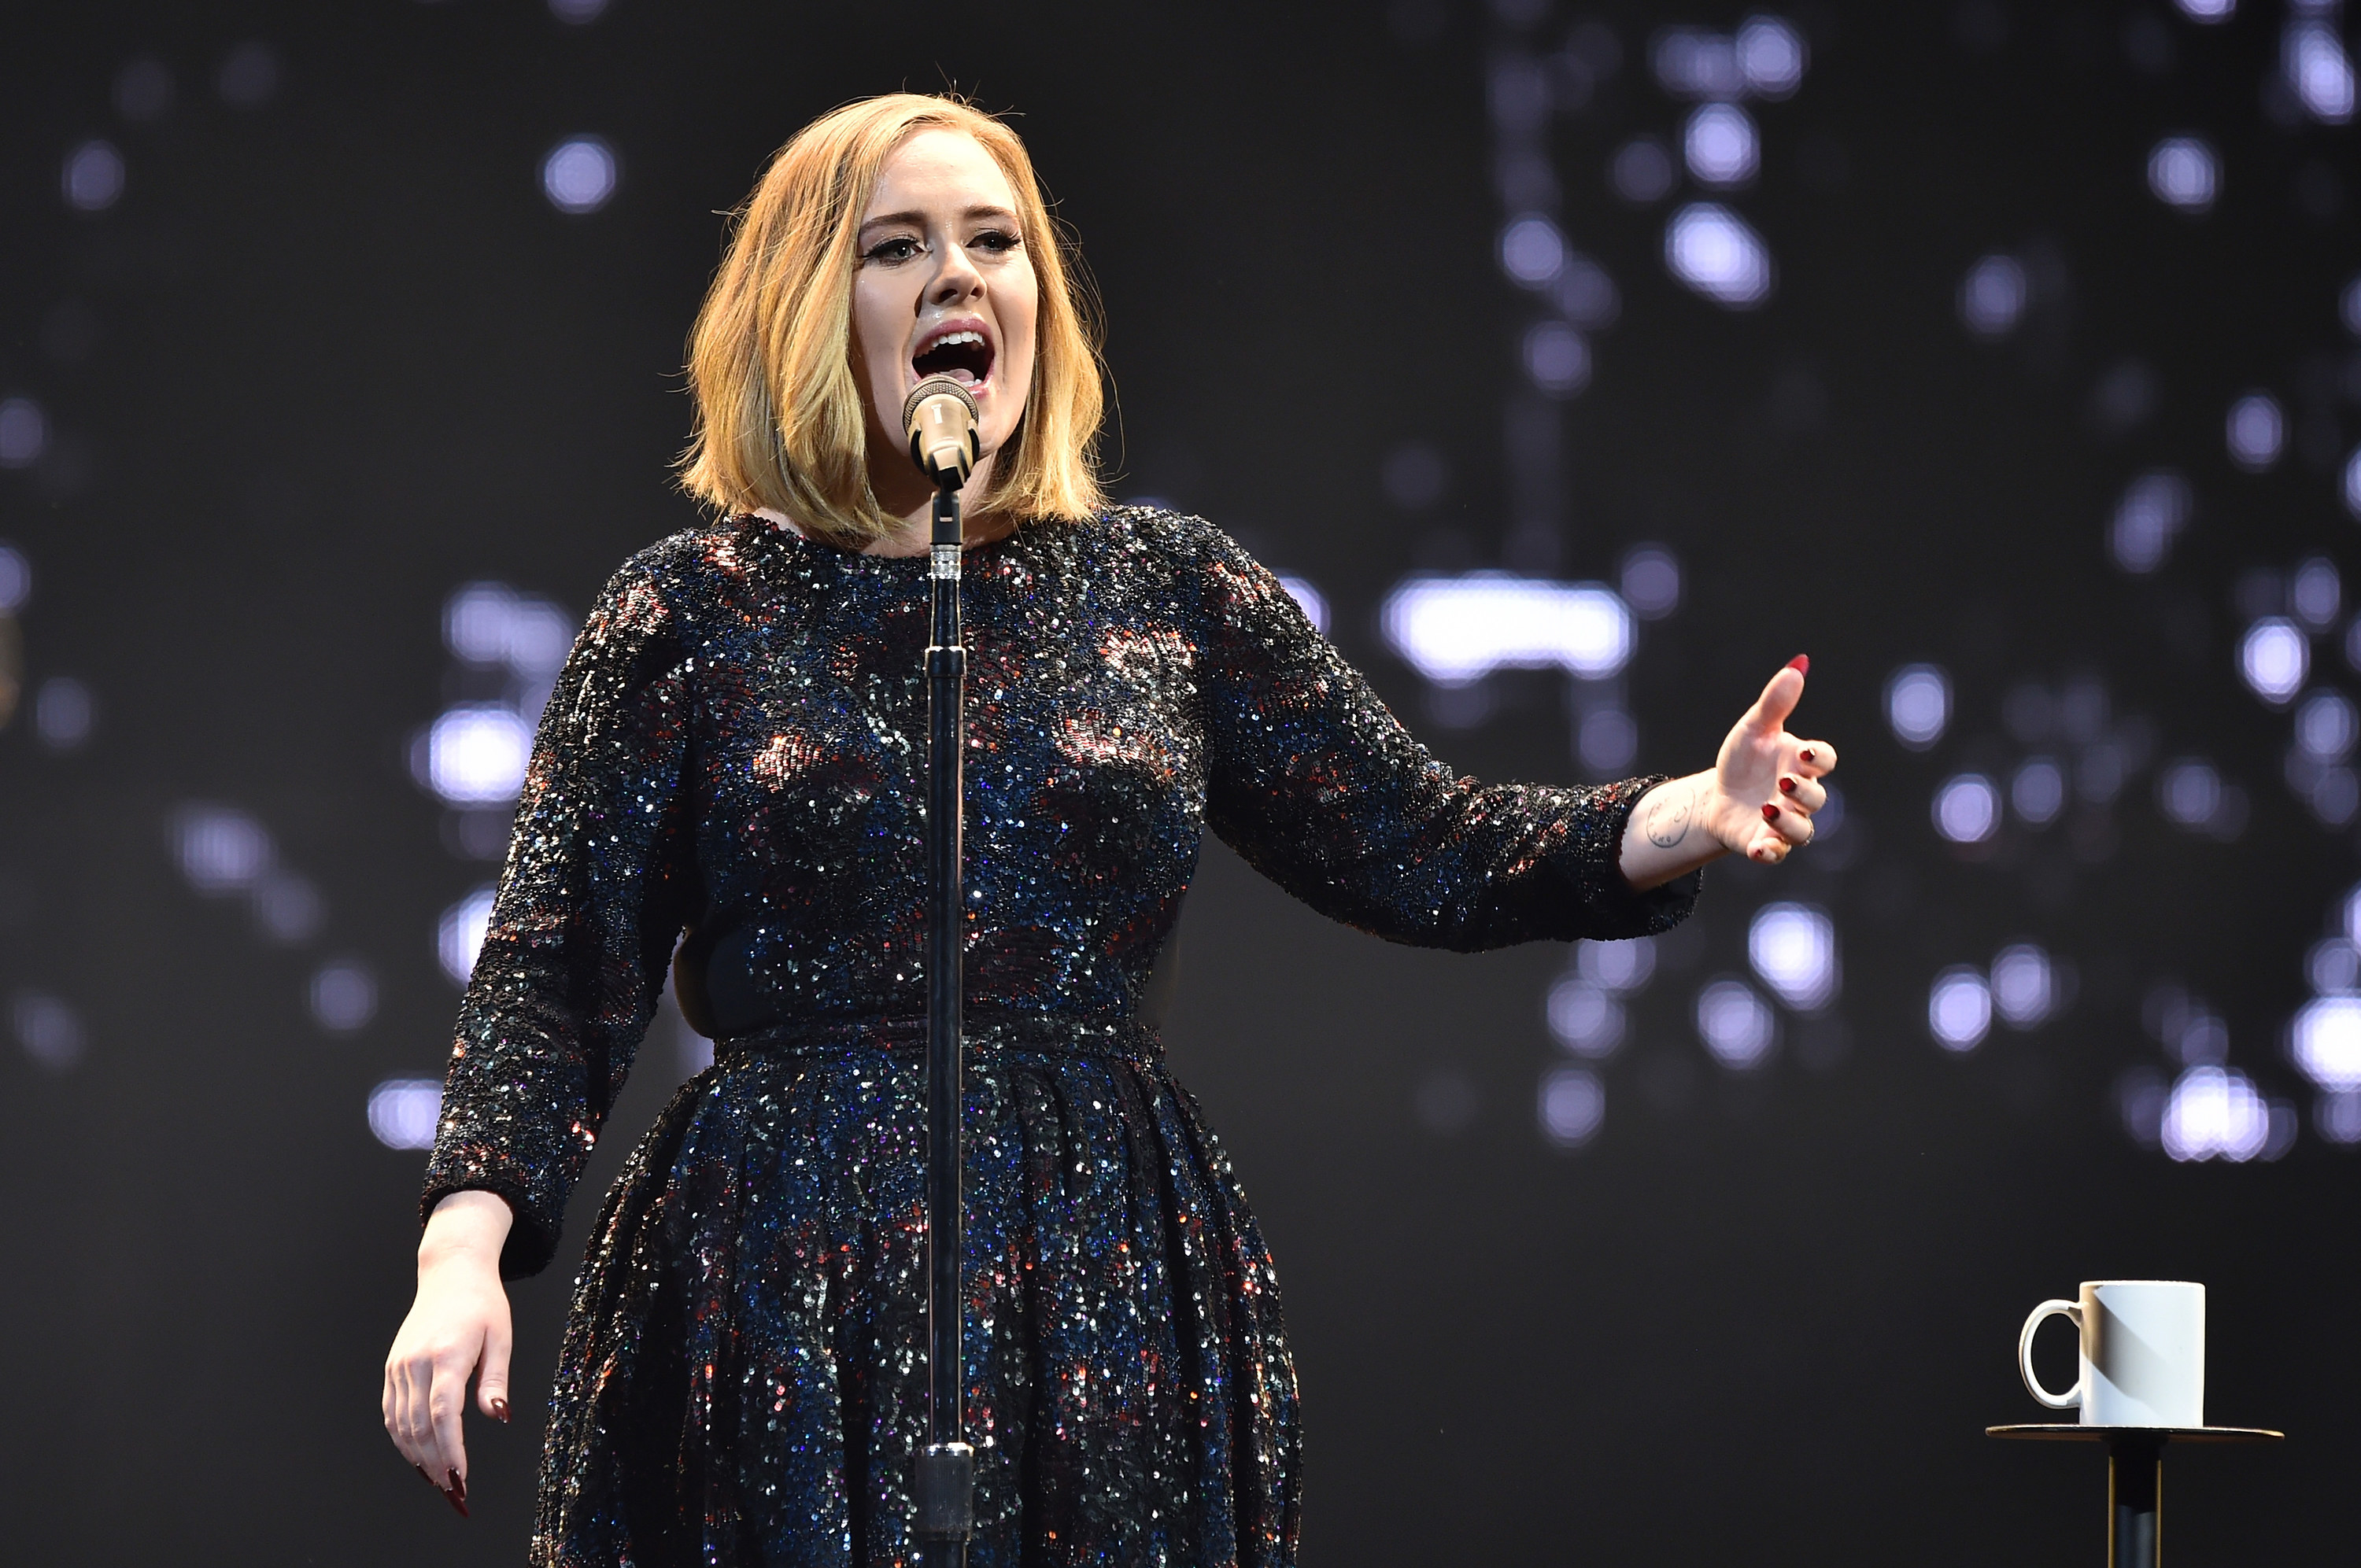 Adele sings with her arm stretched out